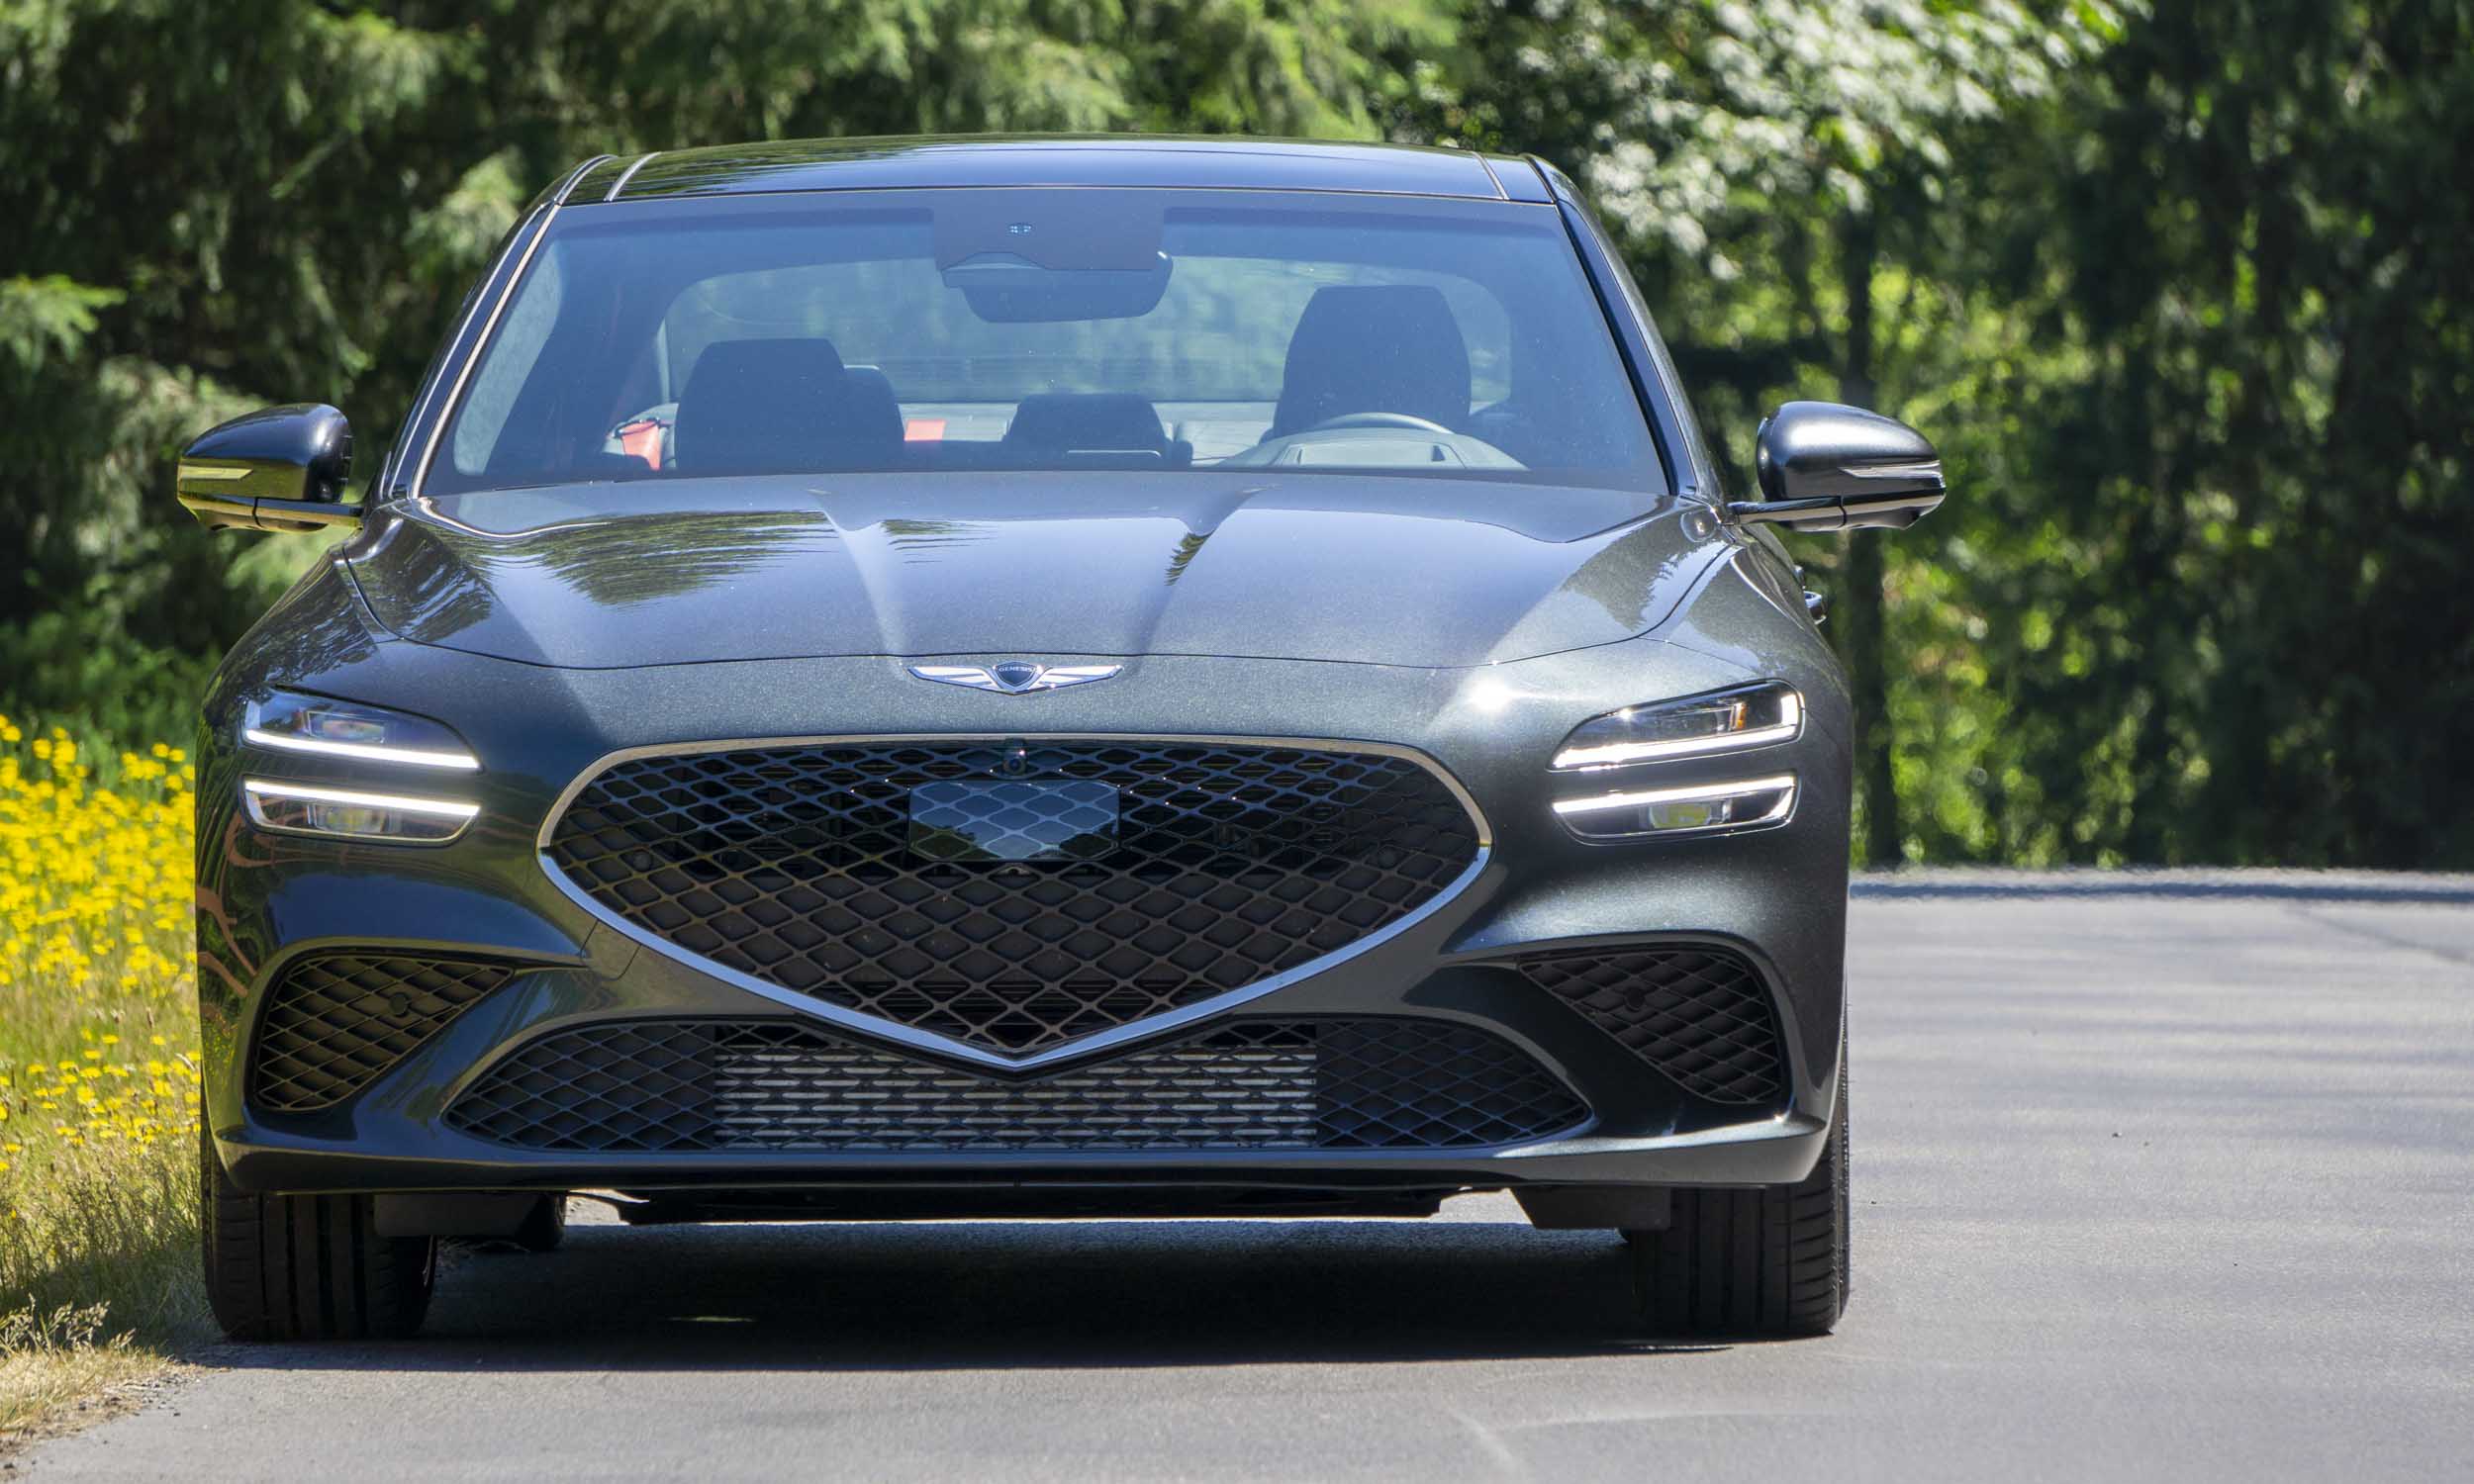 2022 Genesis G70 Review: Value and Performance | Our Auto Expert